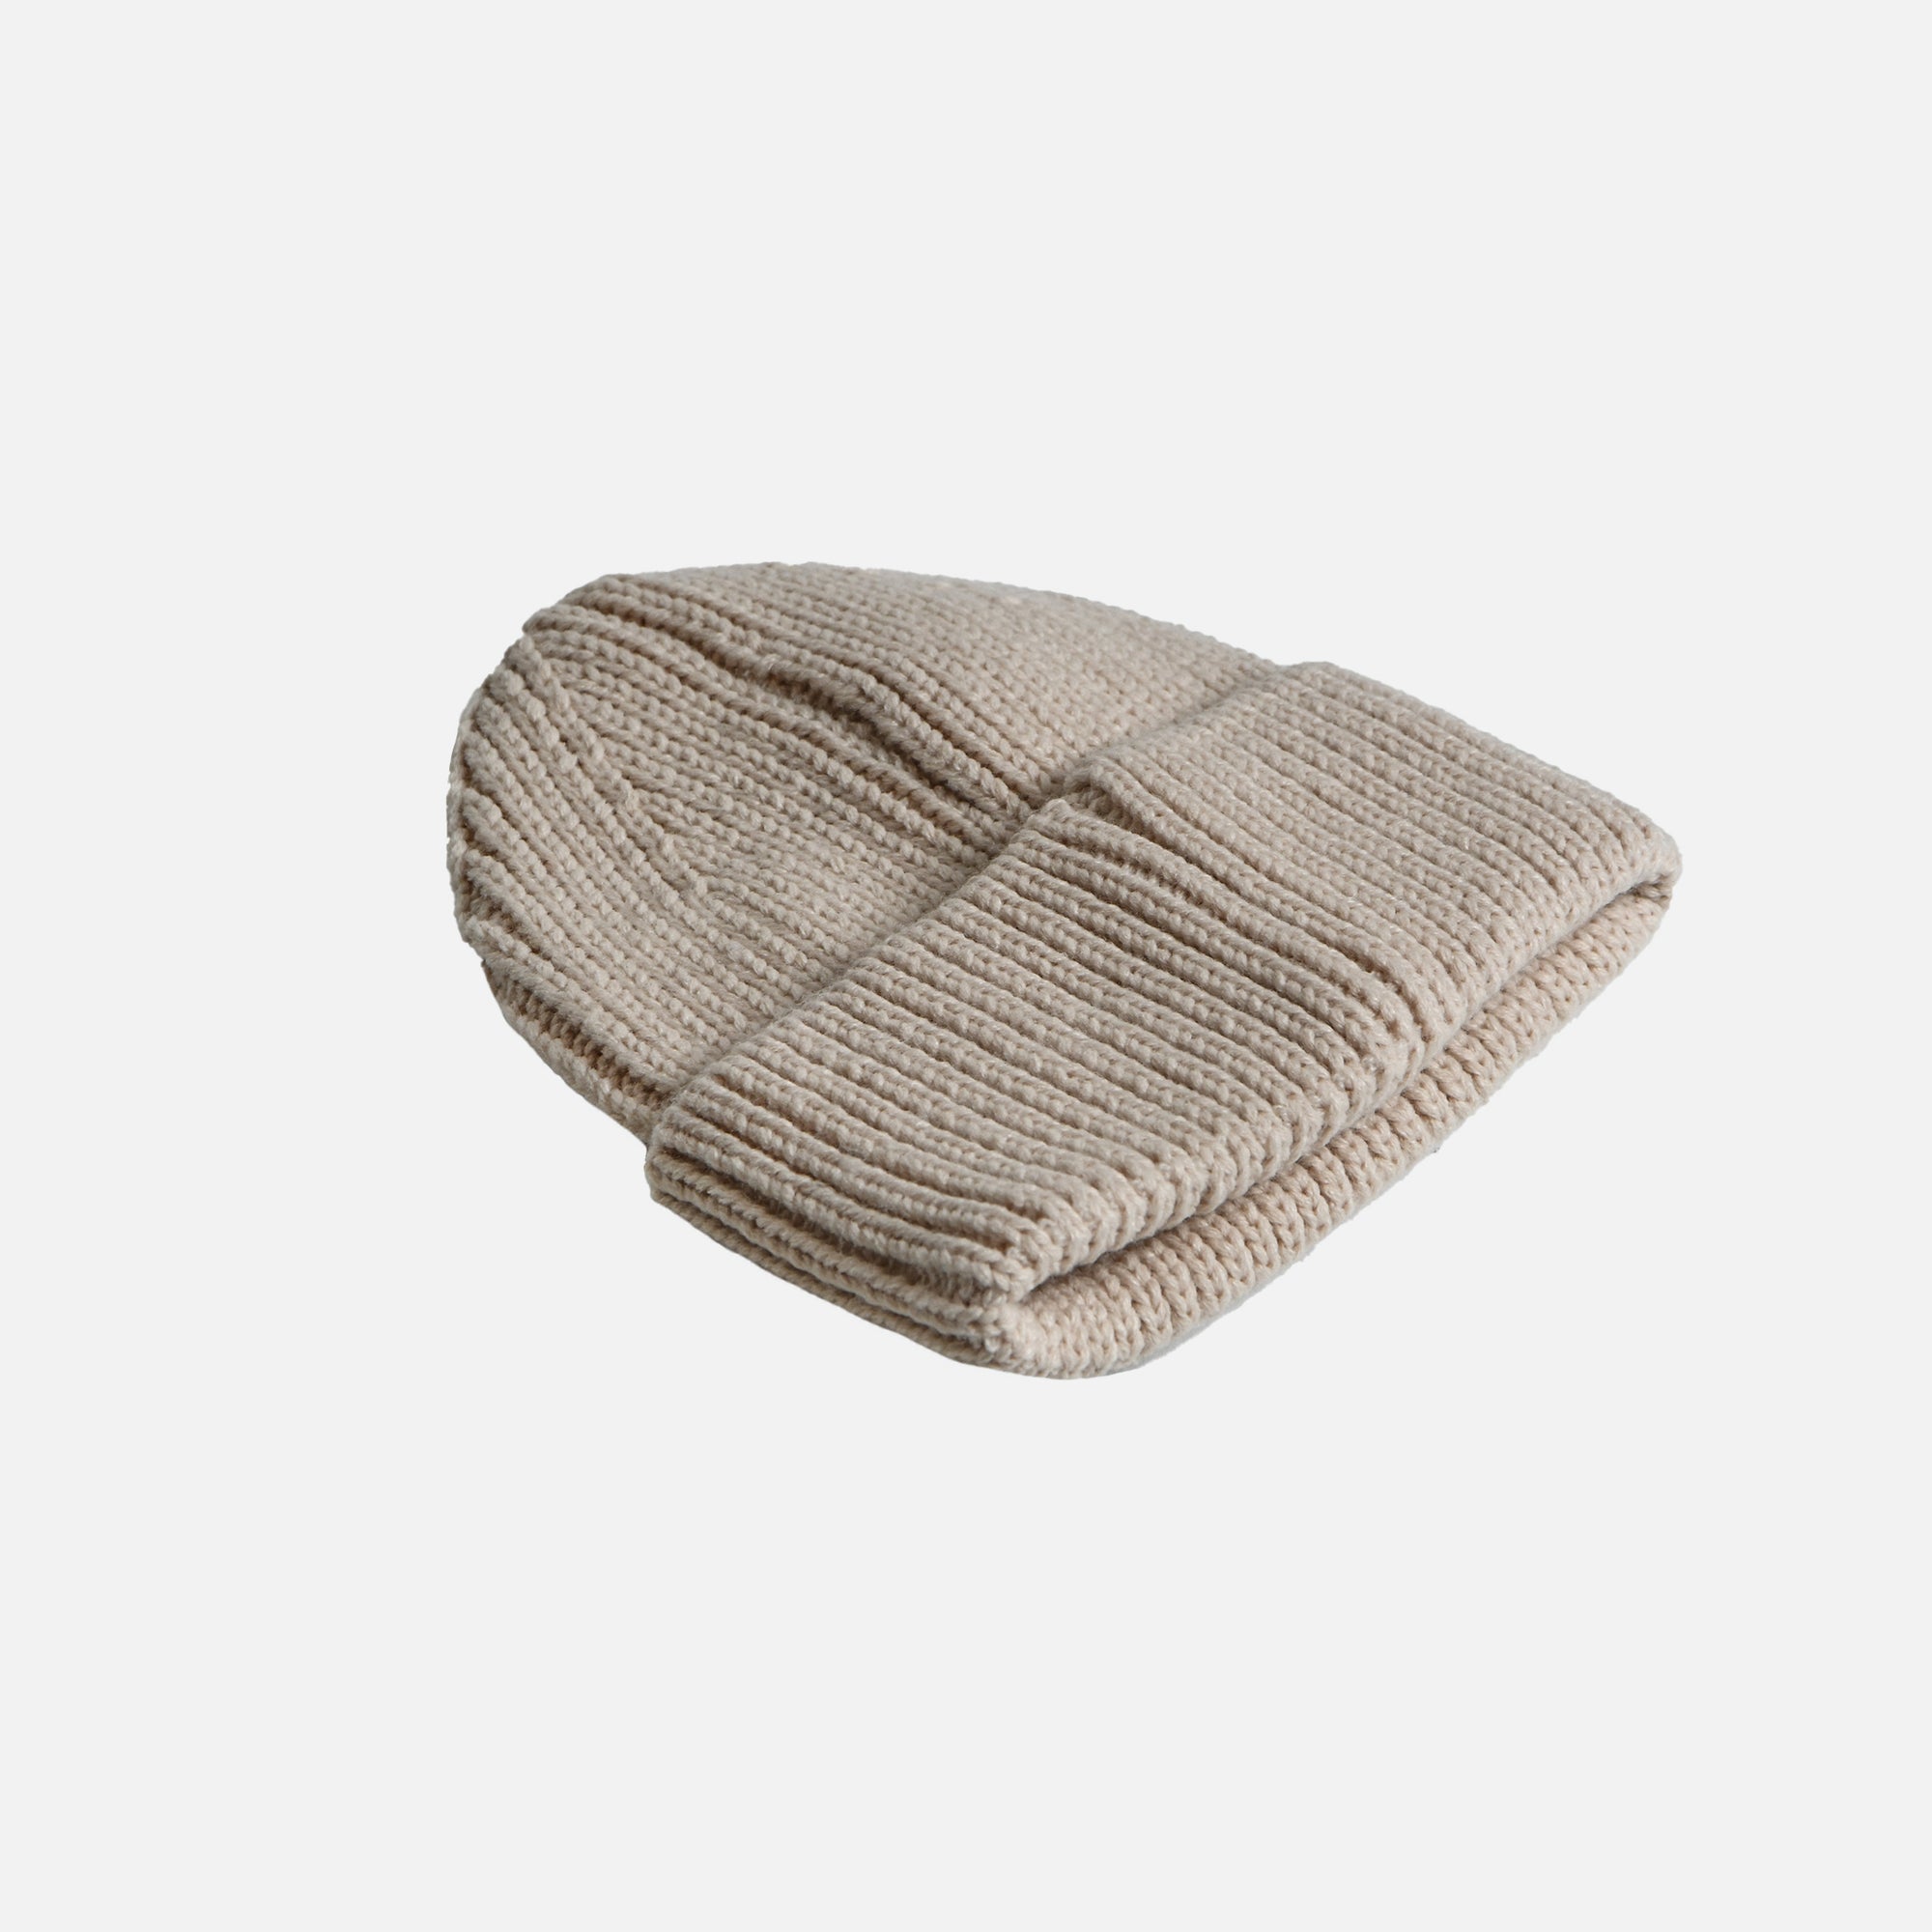 Beige knit beanie with wide turnup